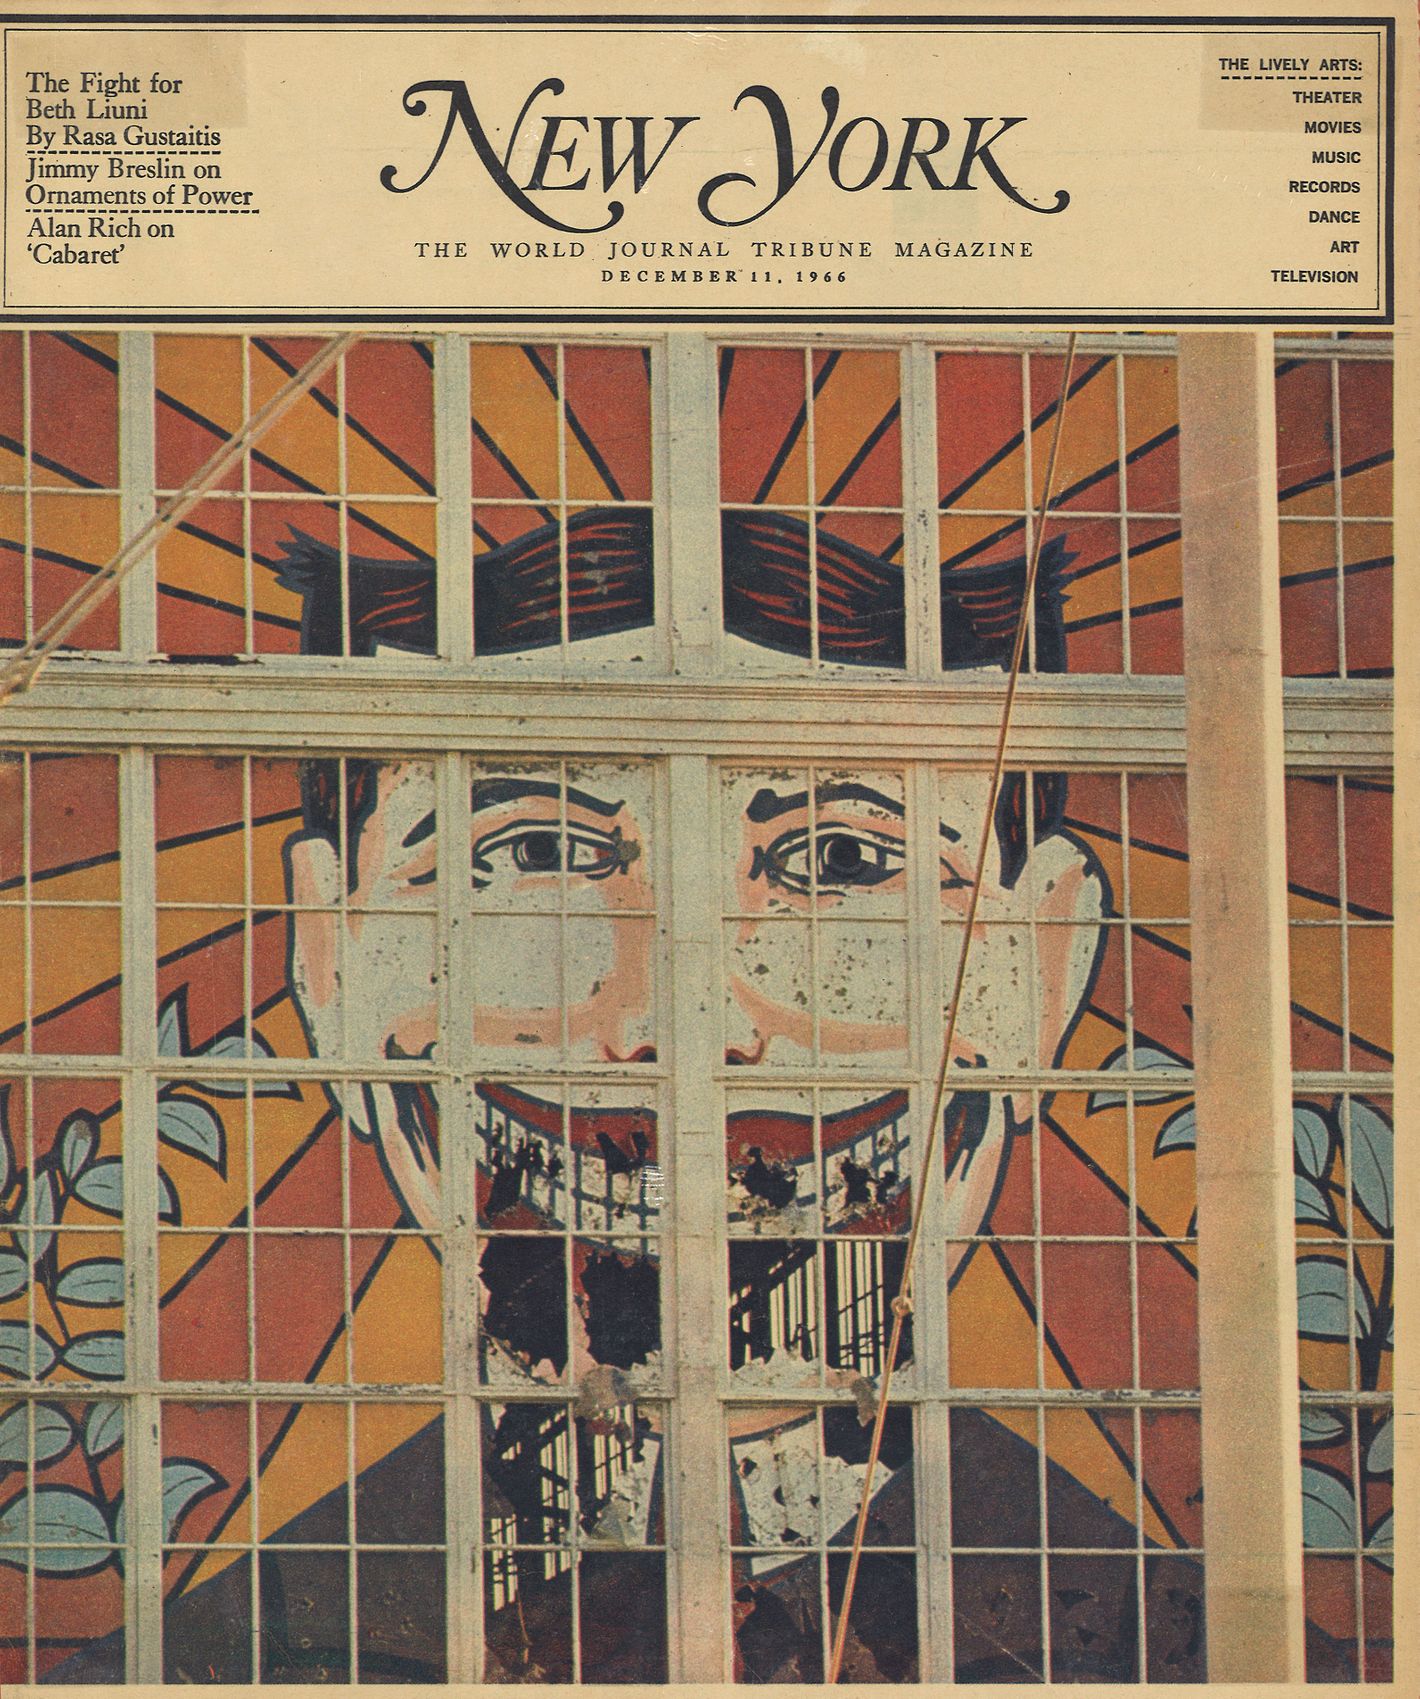 The New Yorker Magazine Subscription - Paper Magazines